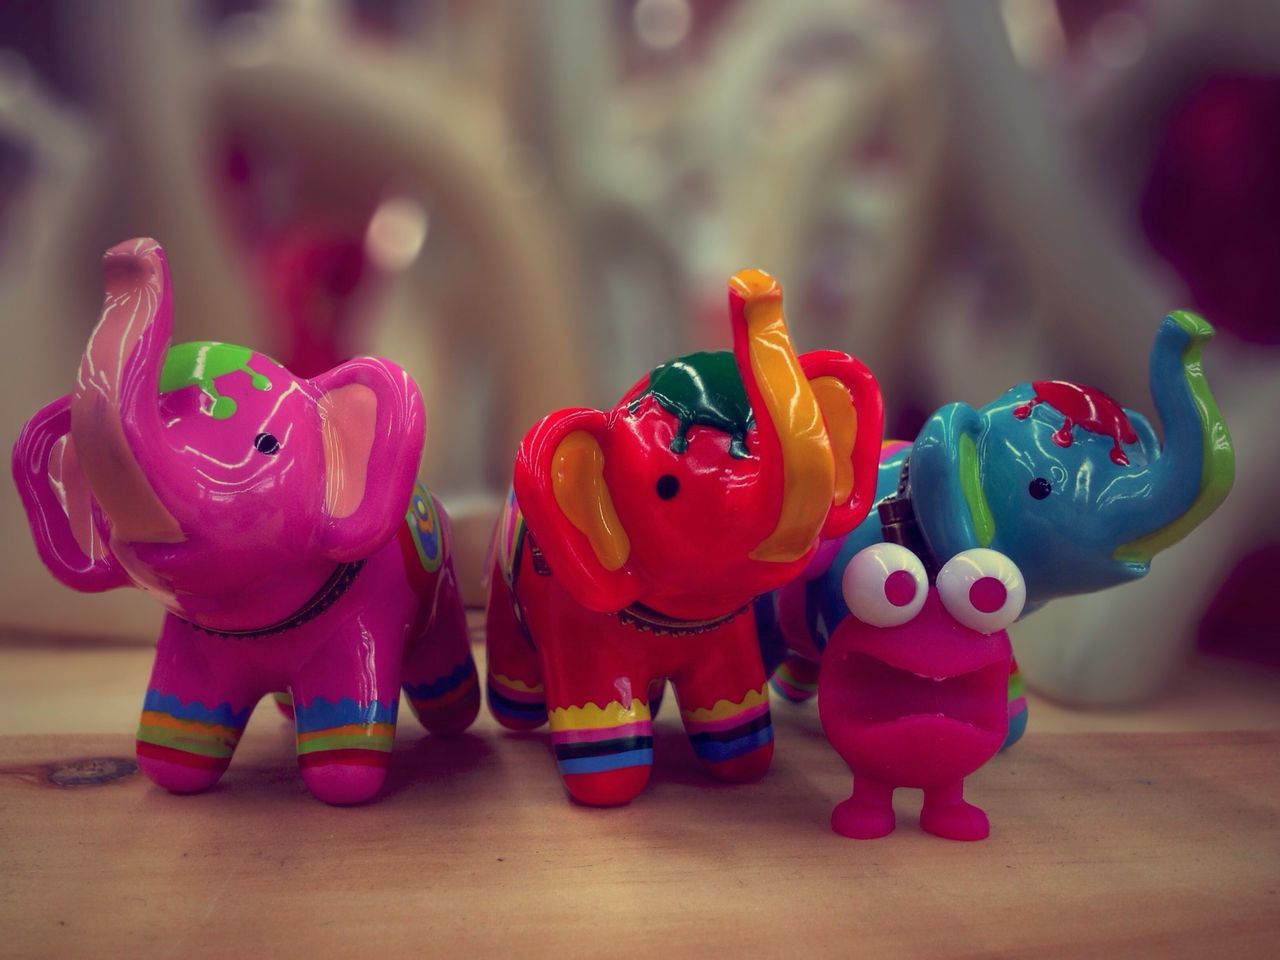 indoors, close-up, focus on foreground, multi colored, toy, still life, art and craft, creativity, selective focus, art, red, human representation, decoration, table, animal representation, celebration, variation, childhood, colorful, pink color